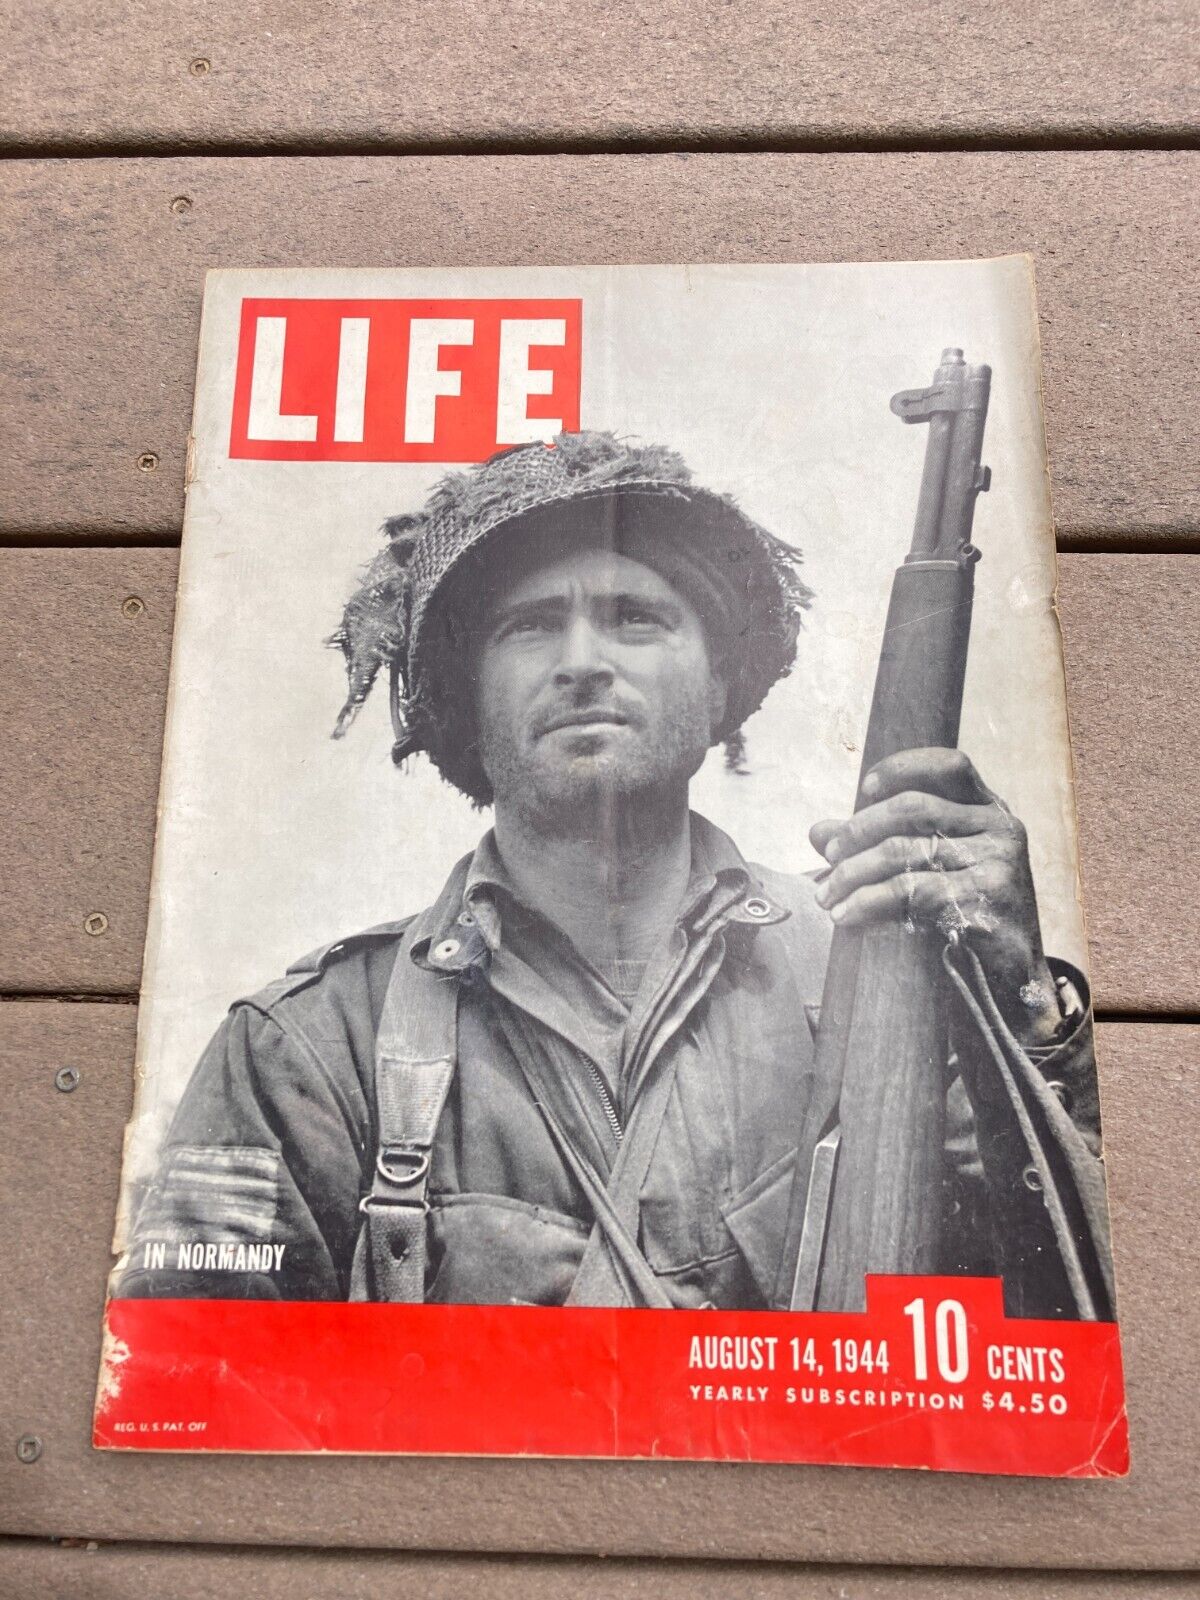 LIFE MAGAZINE: AUGUST 14 1944 IN NORMANDY WWII / SOLDIER WITH RIFLE